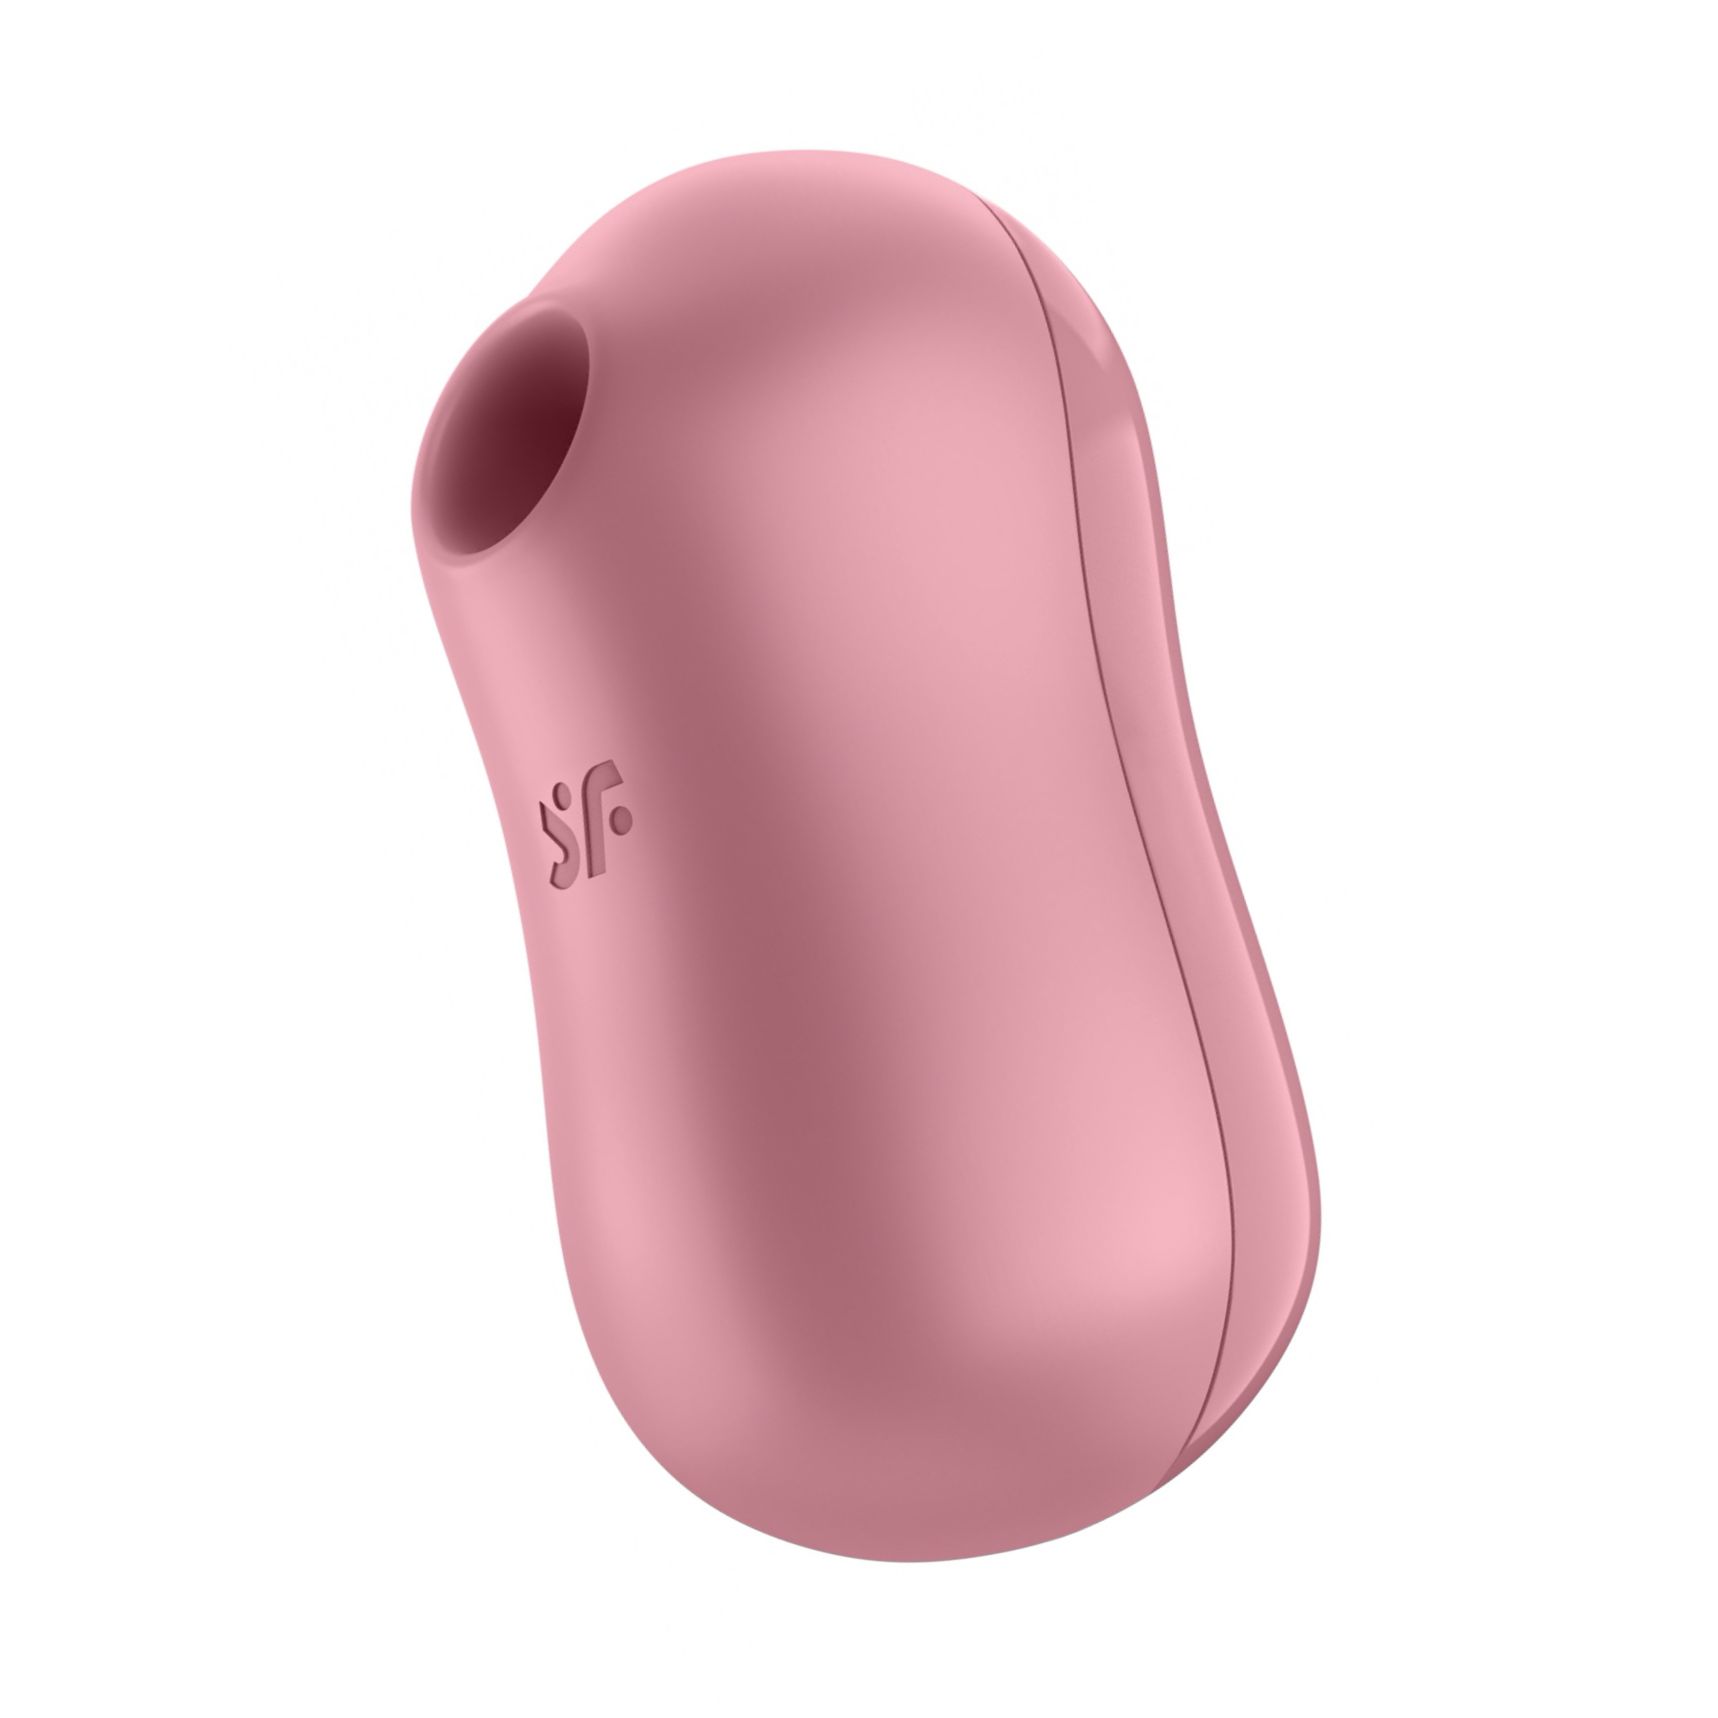 Vibrator Satisfyer Cotton Candy